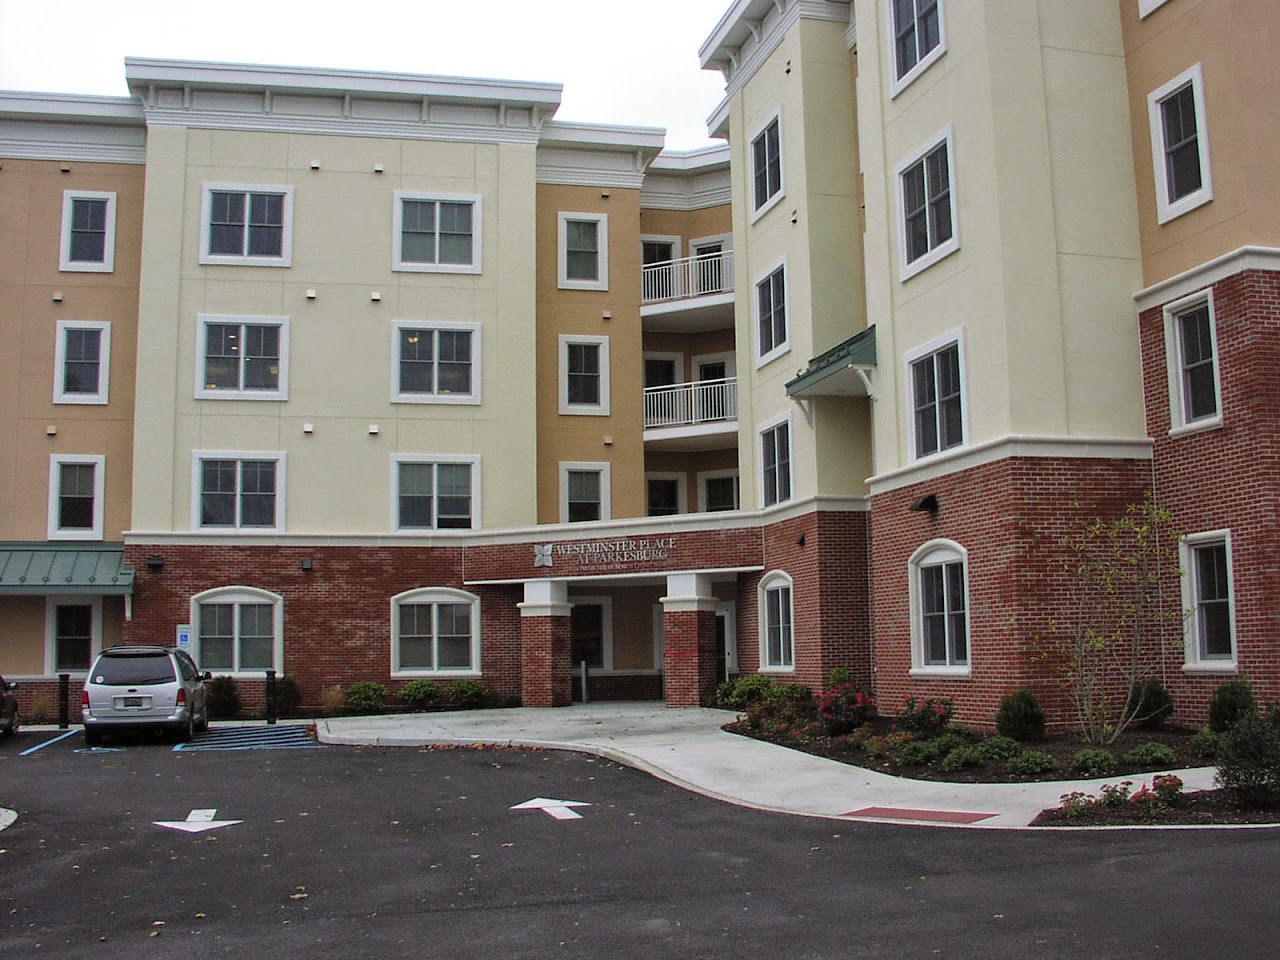 Photo of WESTMINSTER PLACE @ PARKESBURG. Affordable housing located at 320 W FIRST AVE PARKESBURG, PA 19365